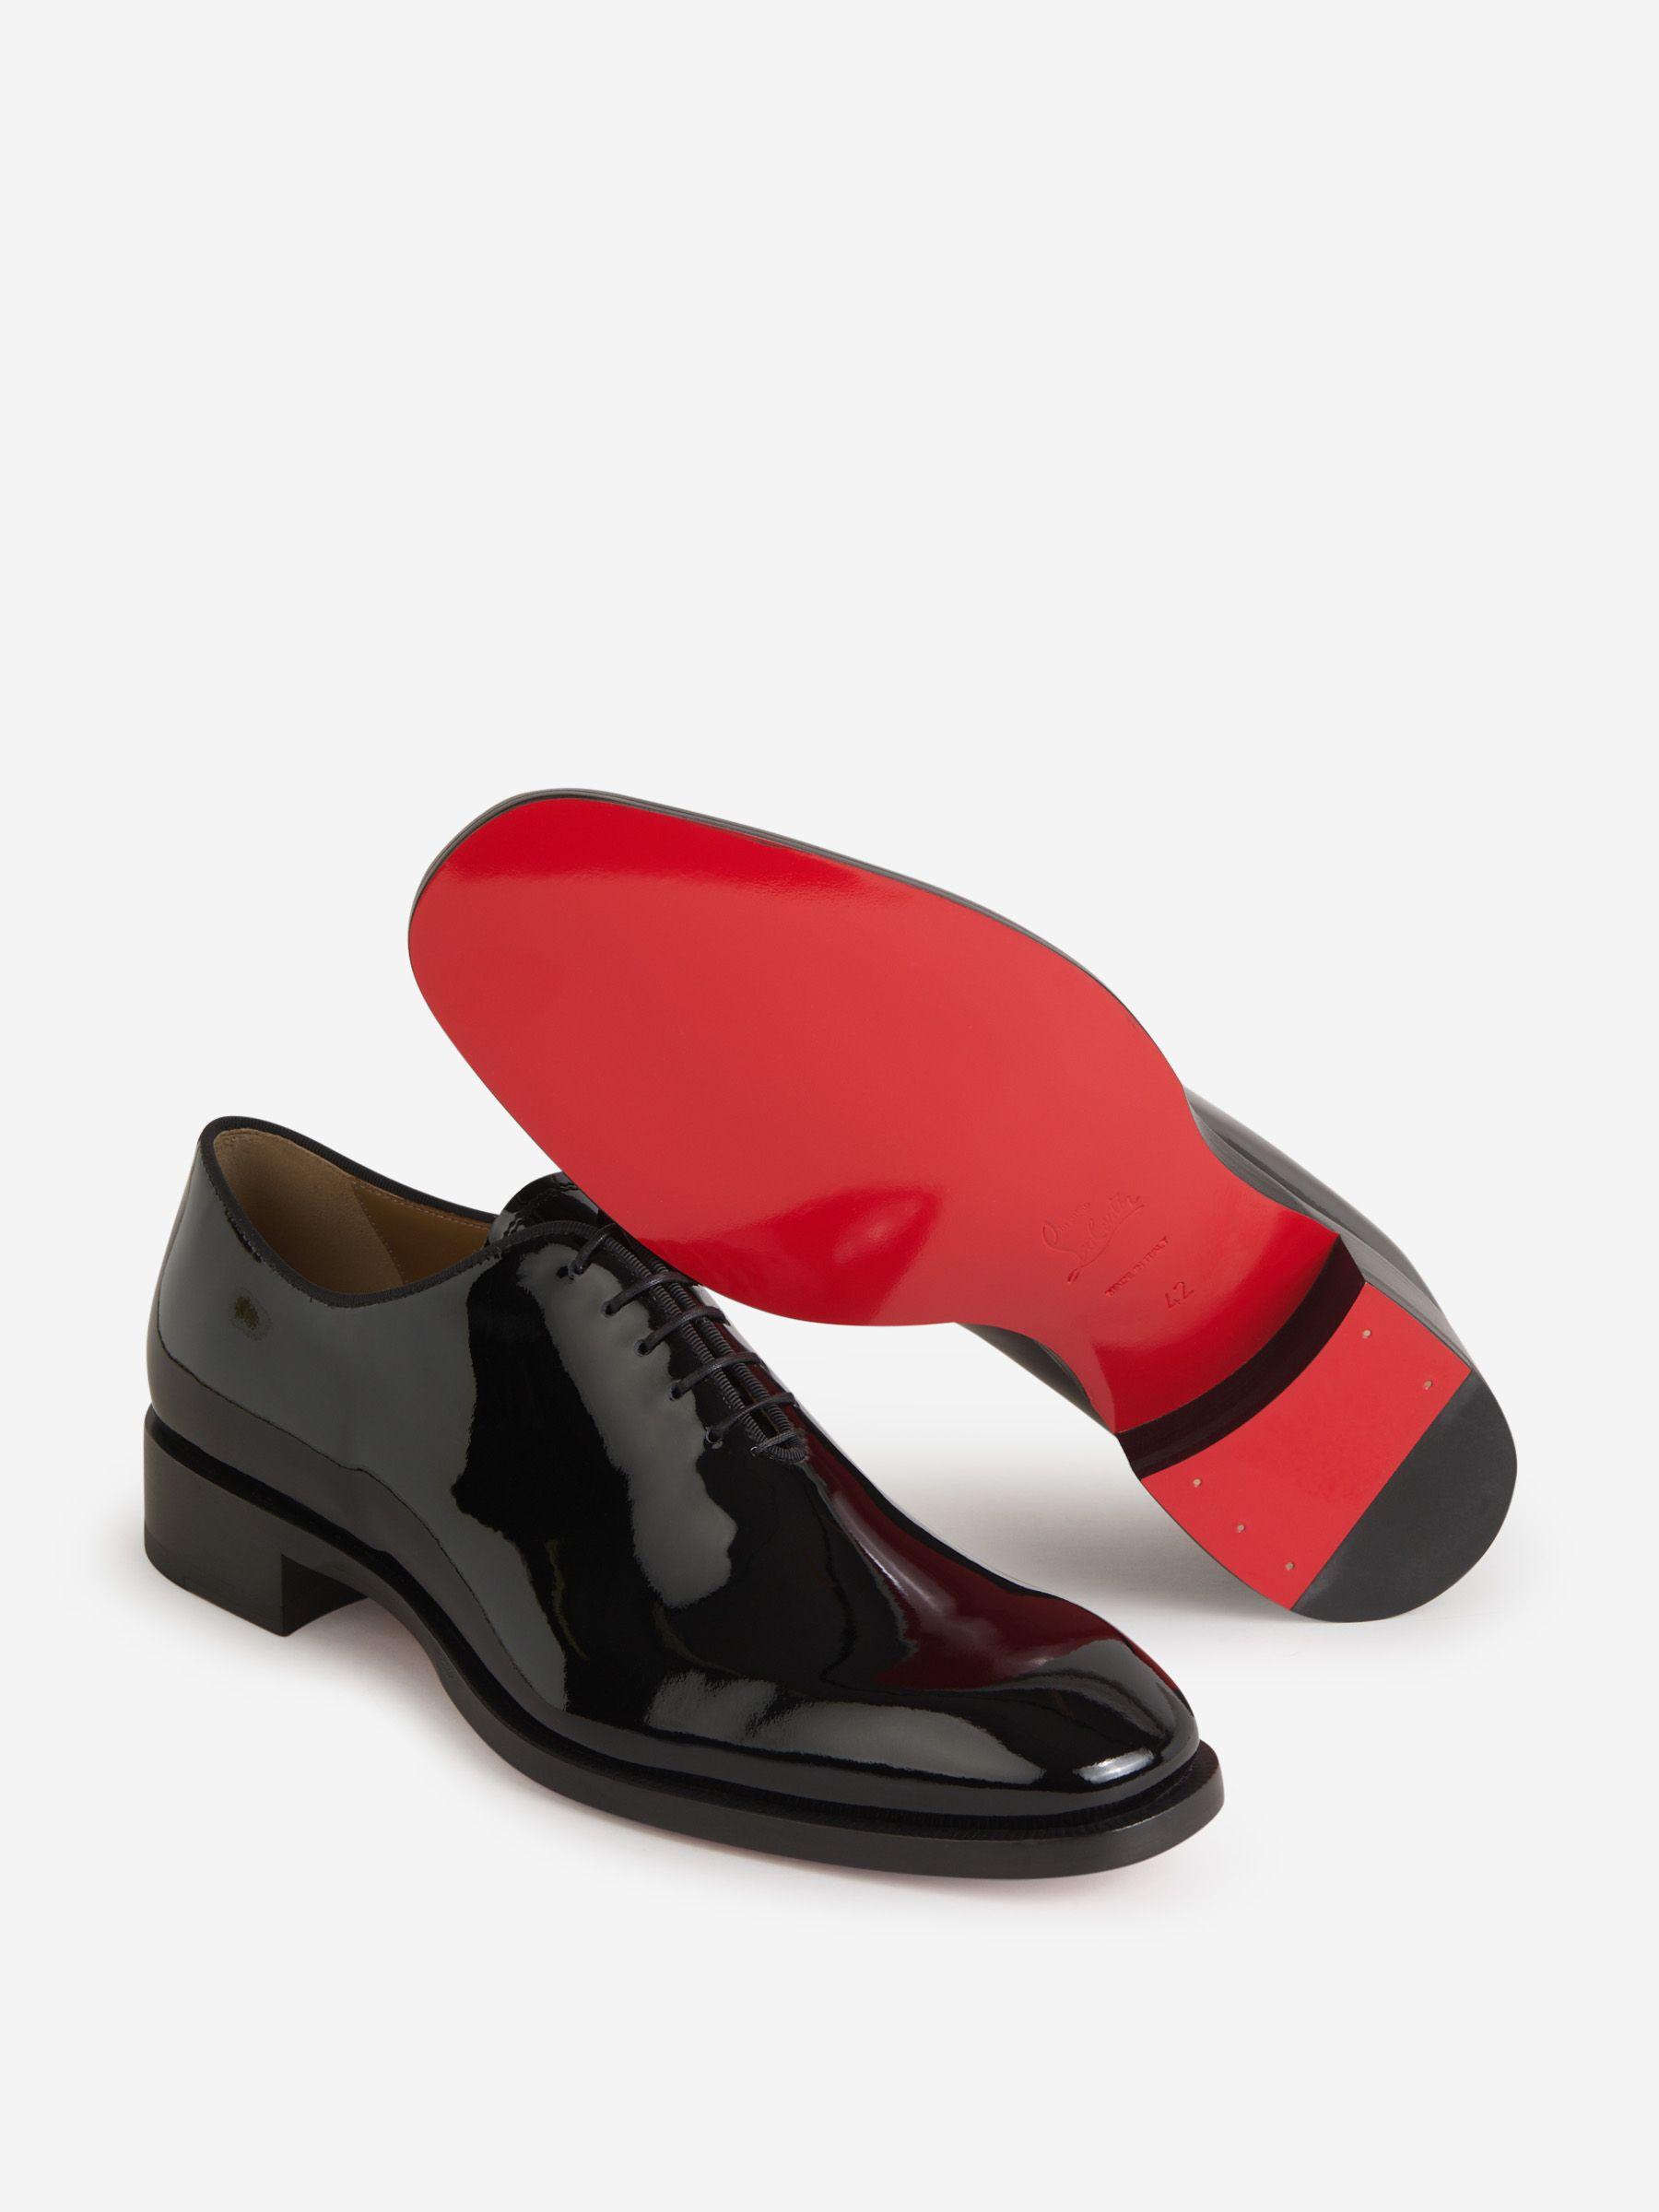 Christian Louboutin Men's Greghost Patent Leather Loafers